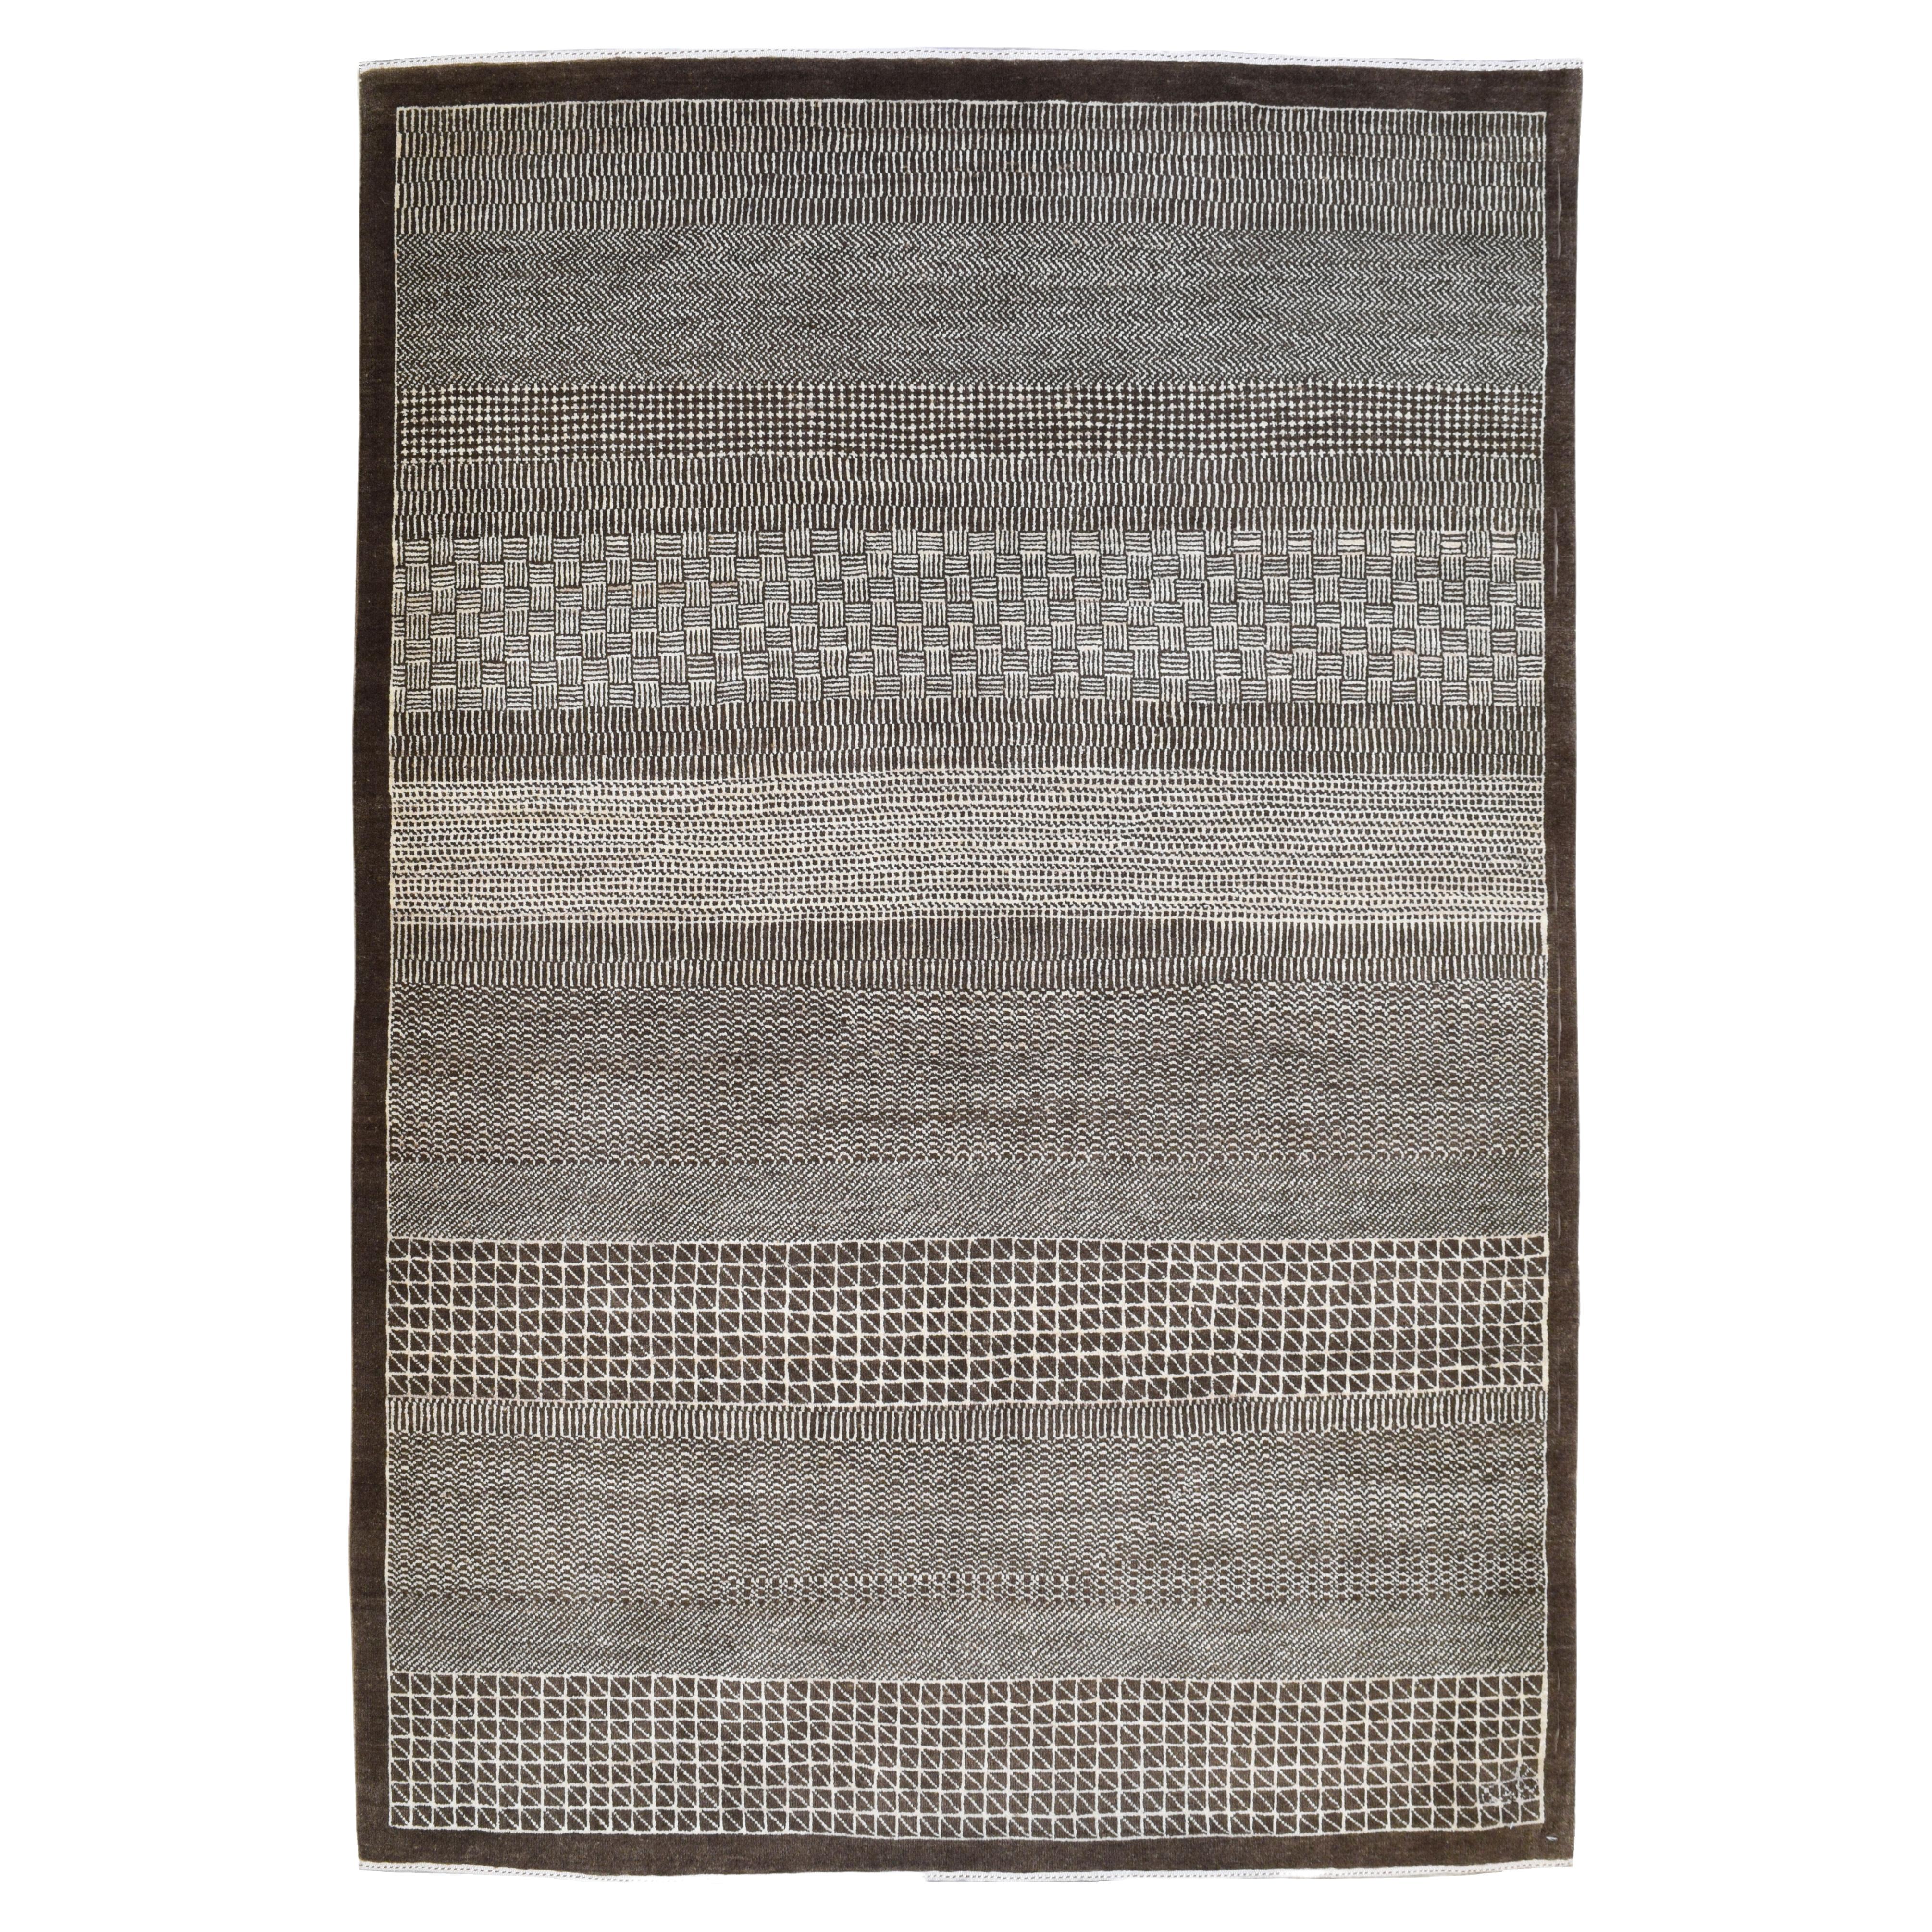 Brown and Cream Modern Architectural Modern Area Rug, Wolle, 5 x 7